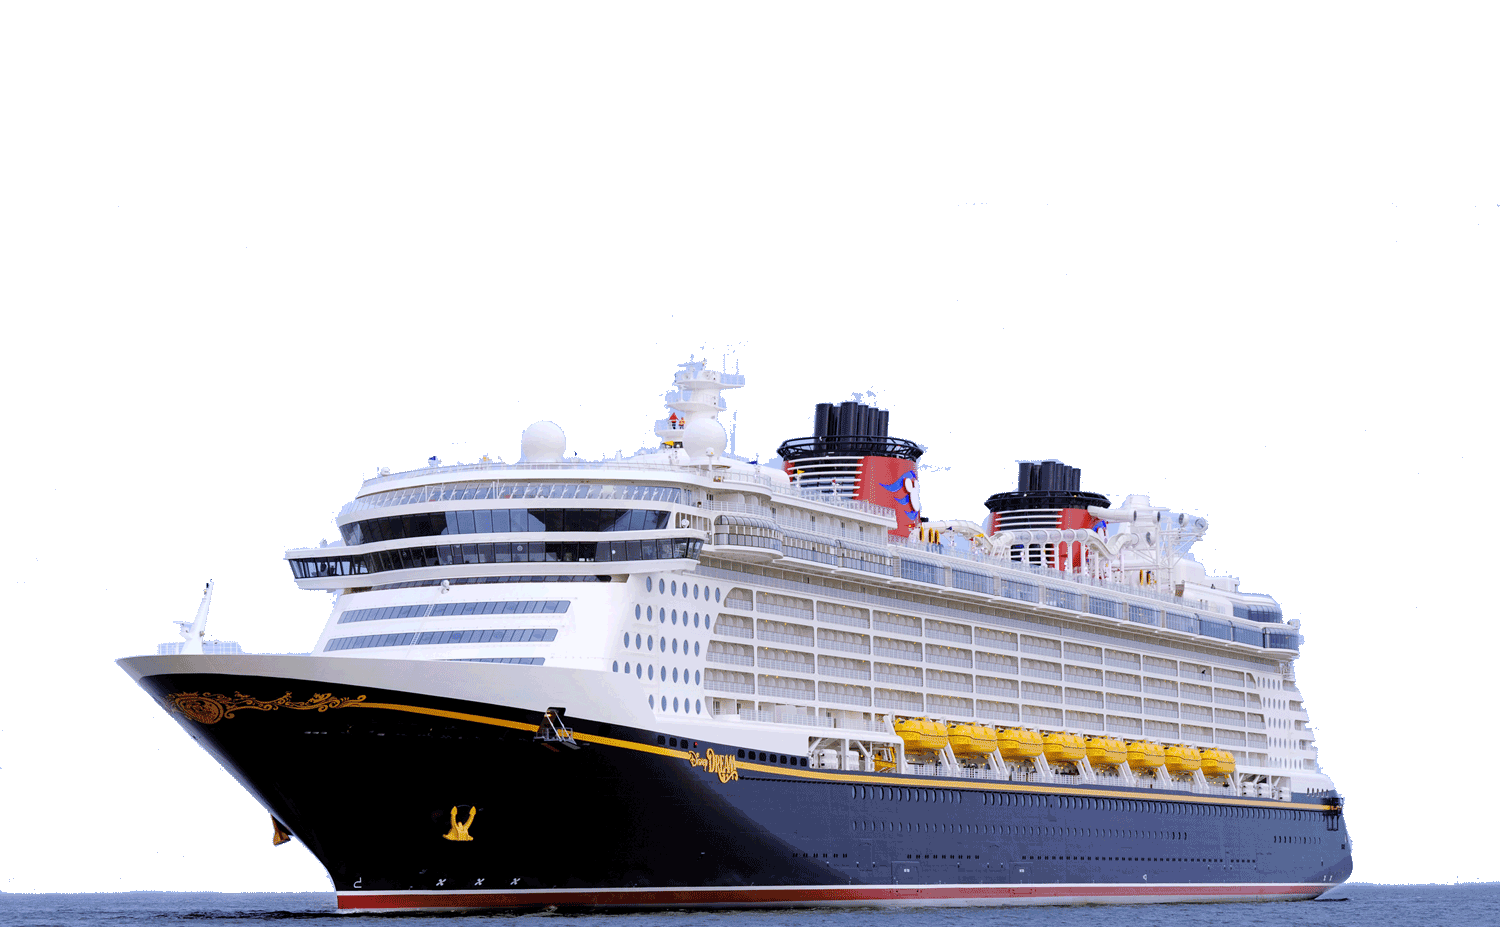 Dreaming of a Disney Cruise?